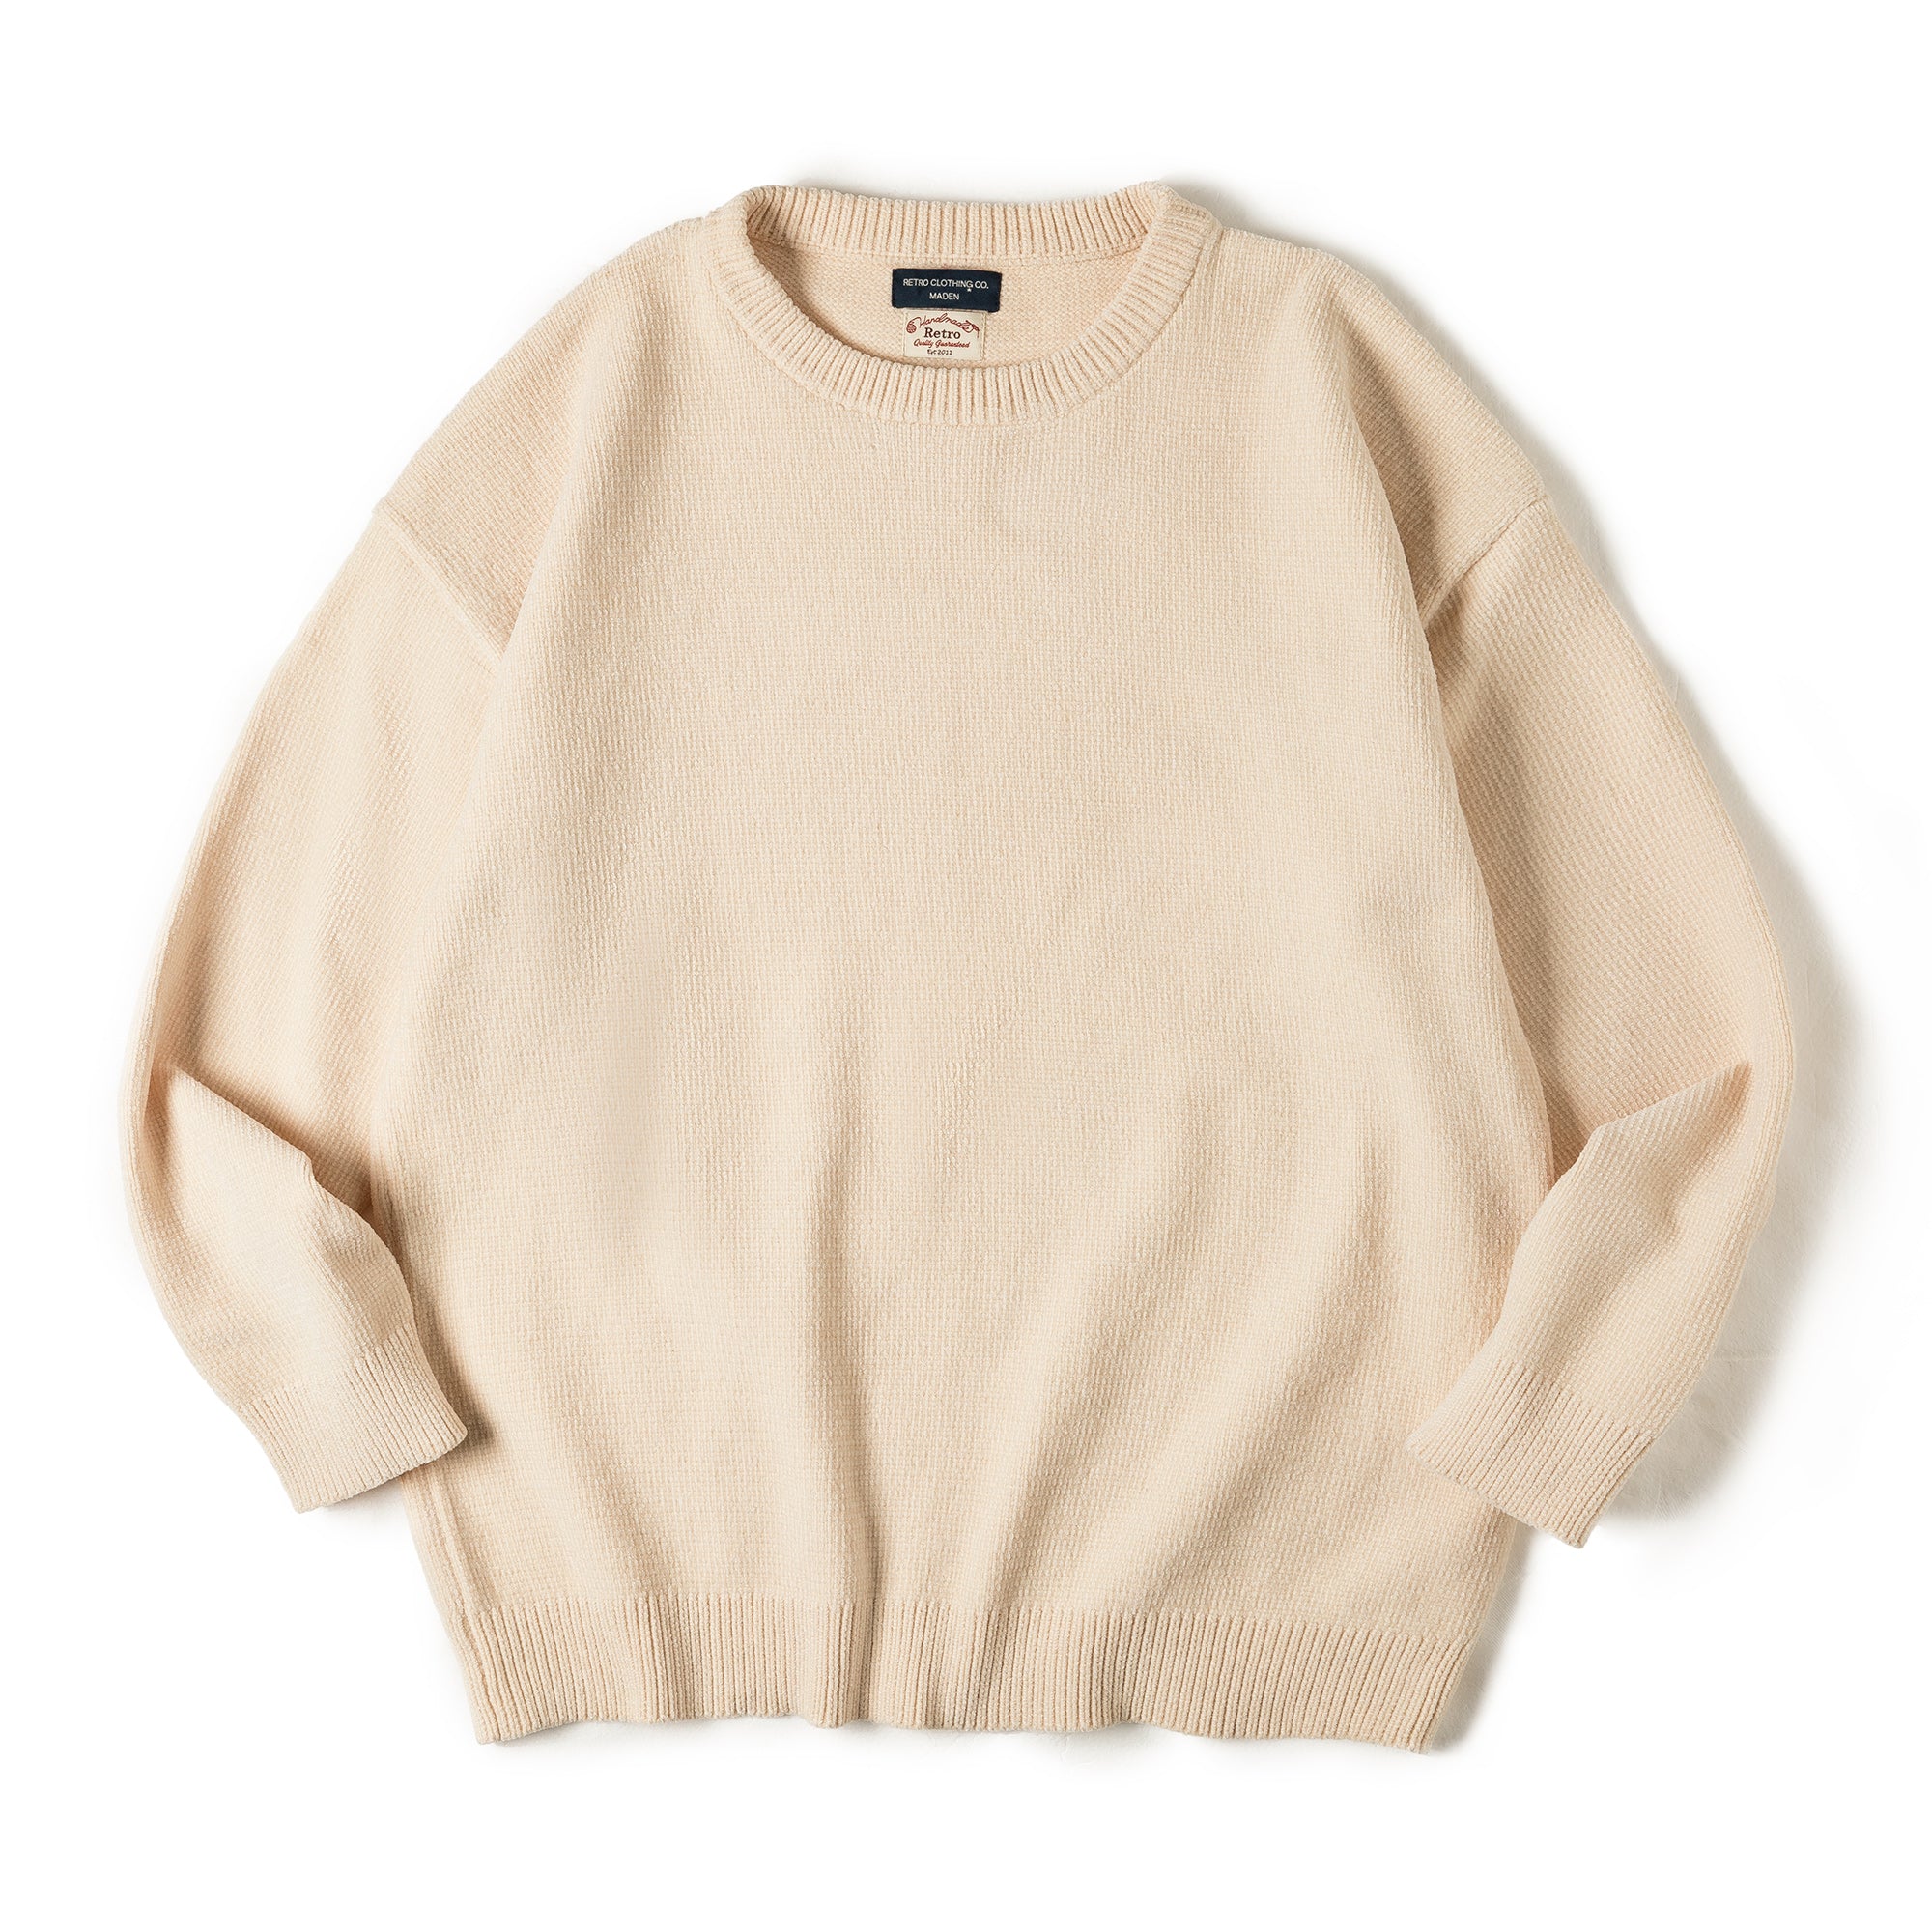 Madden Casual Chenille Sweater Warm and Lazy Men's Knitwear for Autumn/Winter